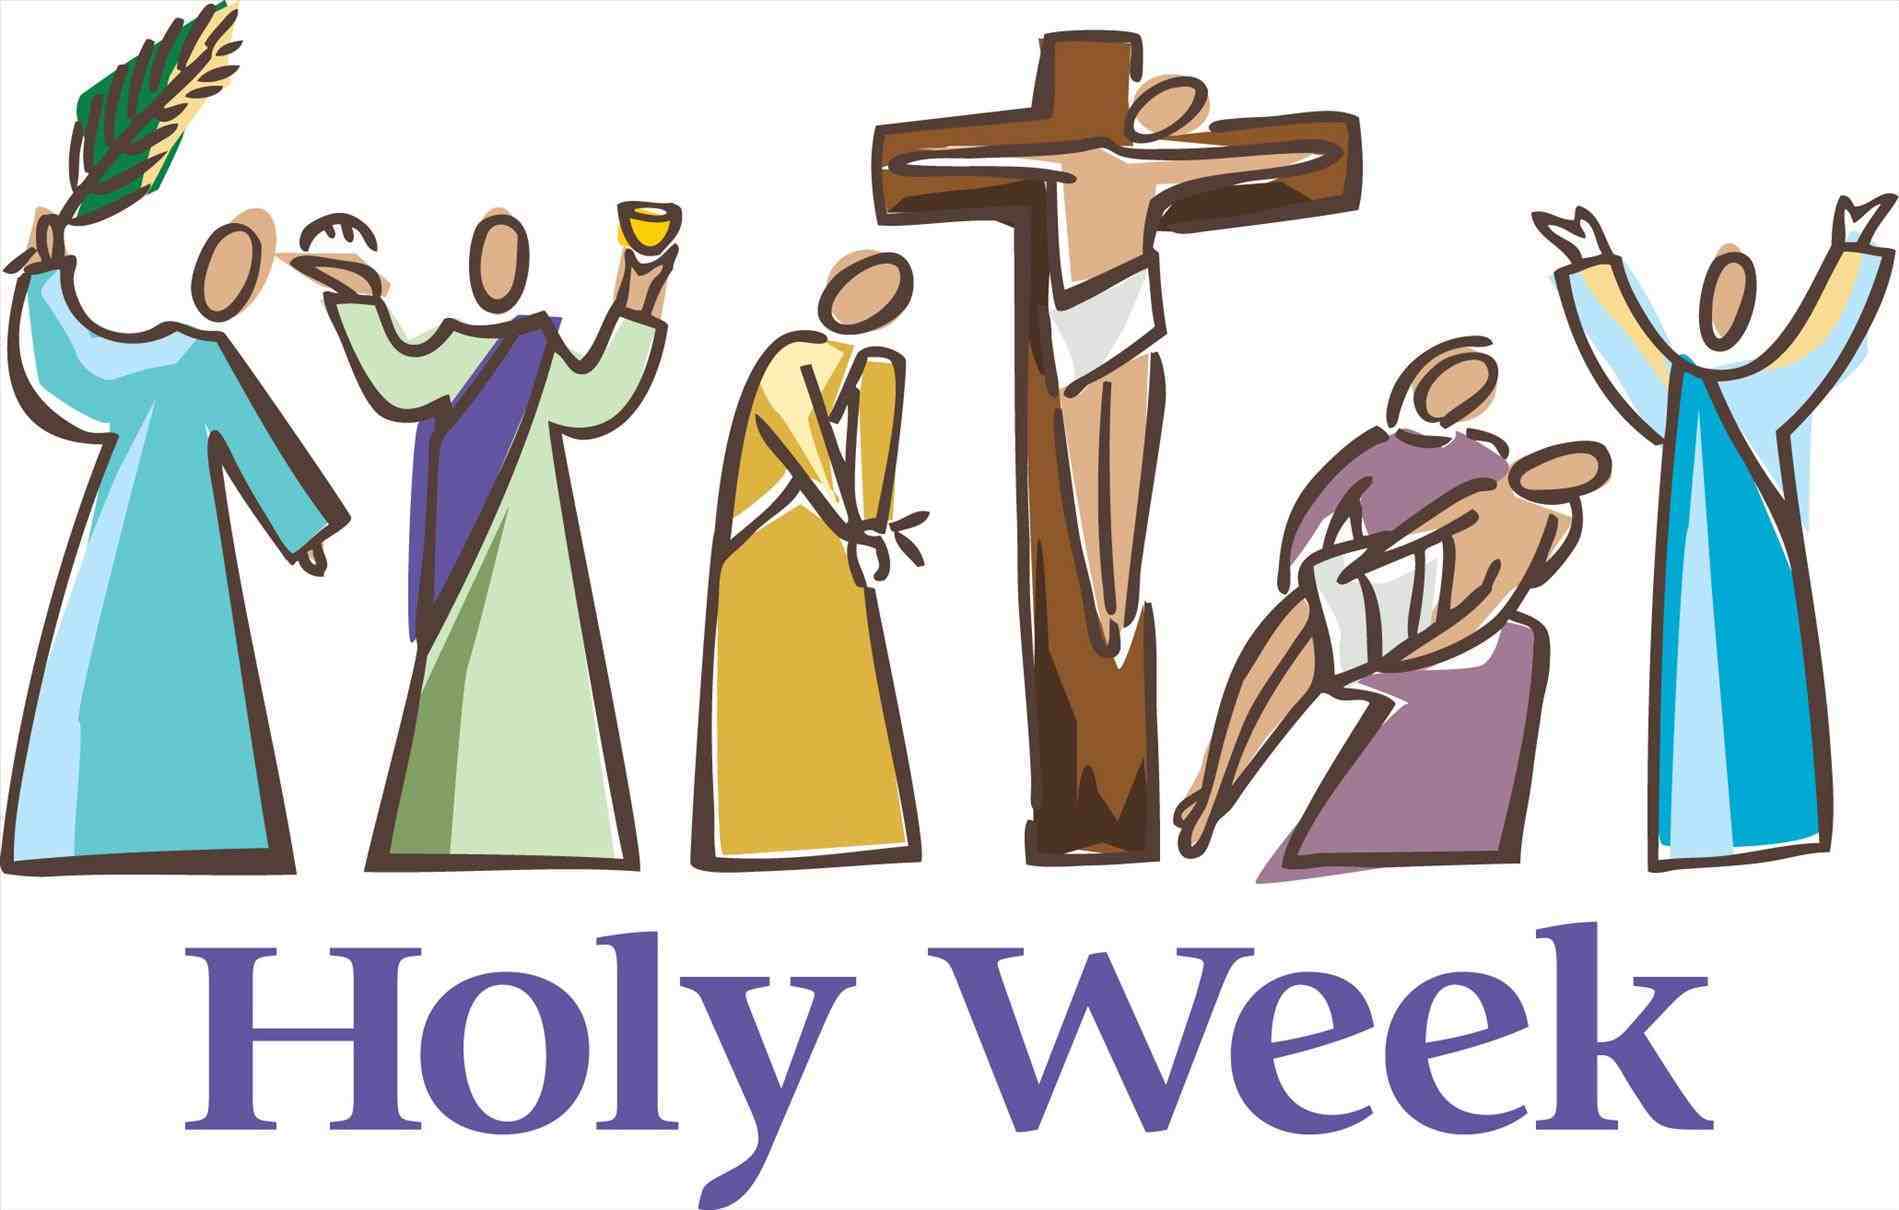 Christ the king lutheran. 2018 clipart holy week